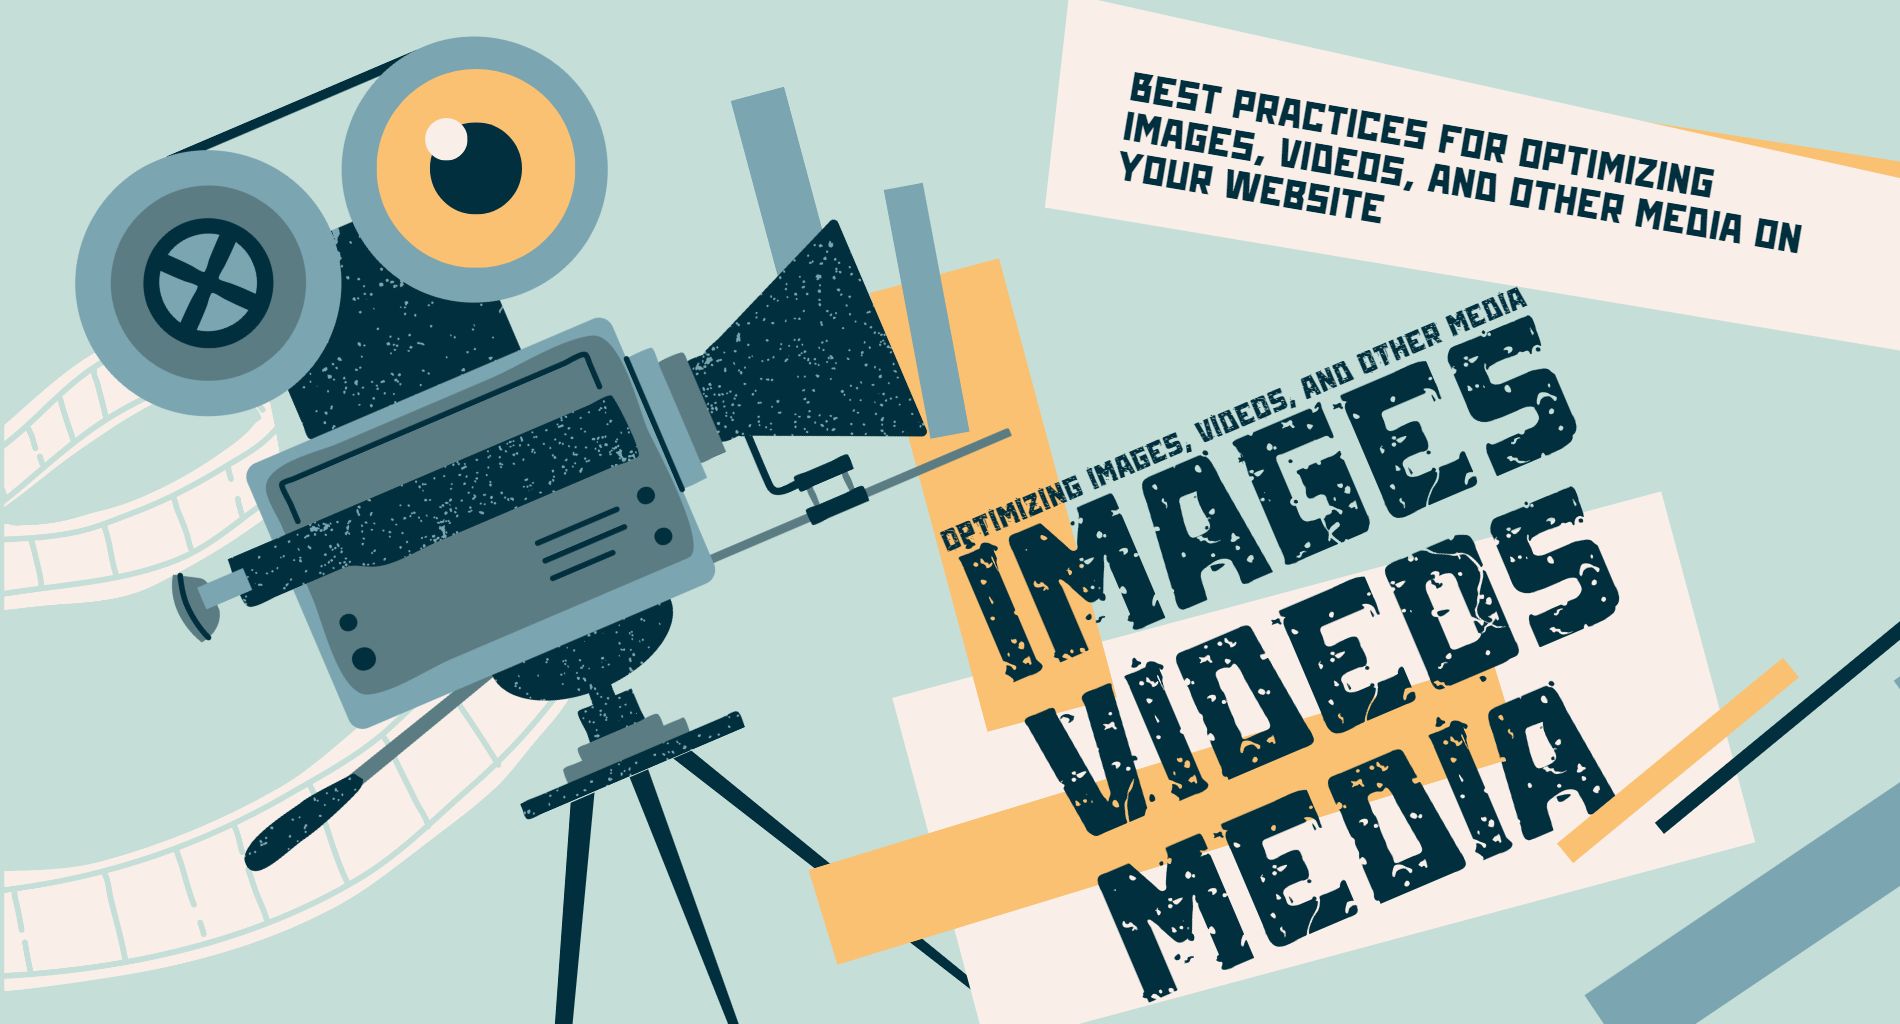 Best Practices for Optimizing Images, Videos, and Other Media on Your Website